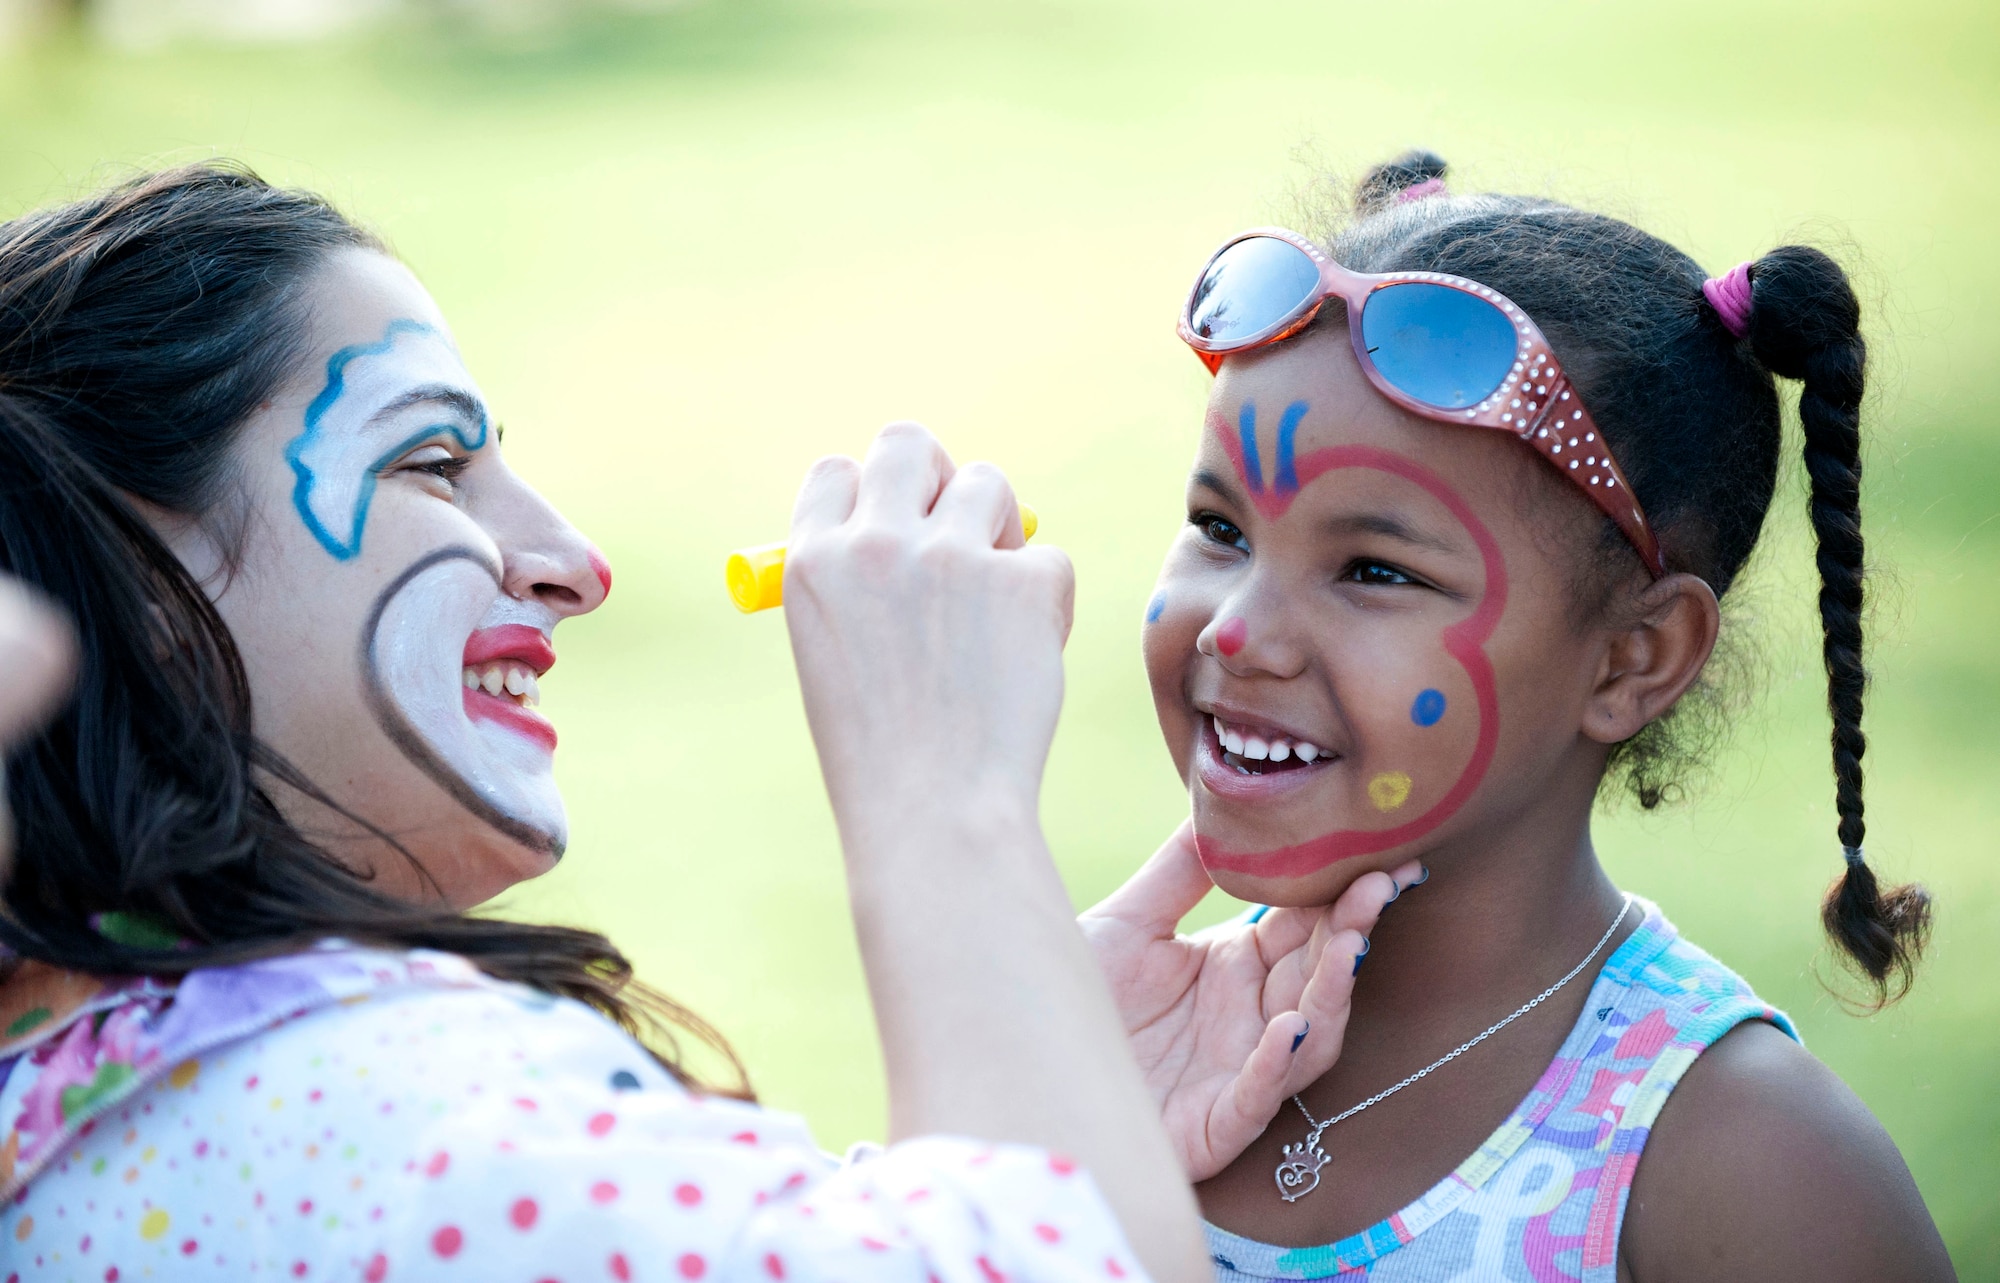 A woman dressed as a clown paints a girl's face during a Children's Day festival April 22, 2012, at Incirlik Air Base, Turkey. The event was hosted by the Turkish air force 10th Tanker Base Command and was open to all Turkish and American members of Team Incirlik. The event offered an opportunity for camaraderie and building partnership between Turkish and American service members and civilians. Children's Day is a national holiday that honors Turkish children and the future of the country. (U.S. Air Force photo by Senior Airman Jarvie Z. Wallace/Released)  